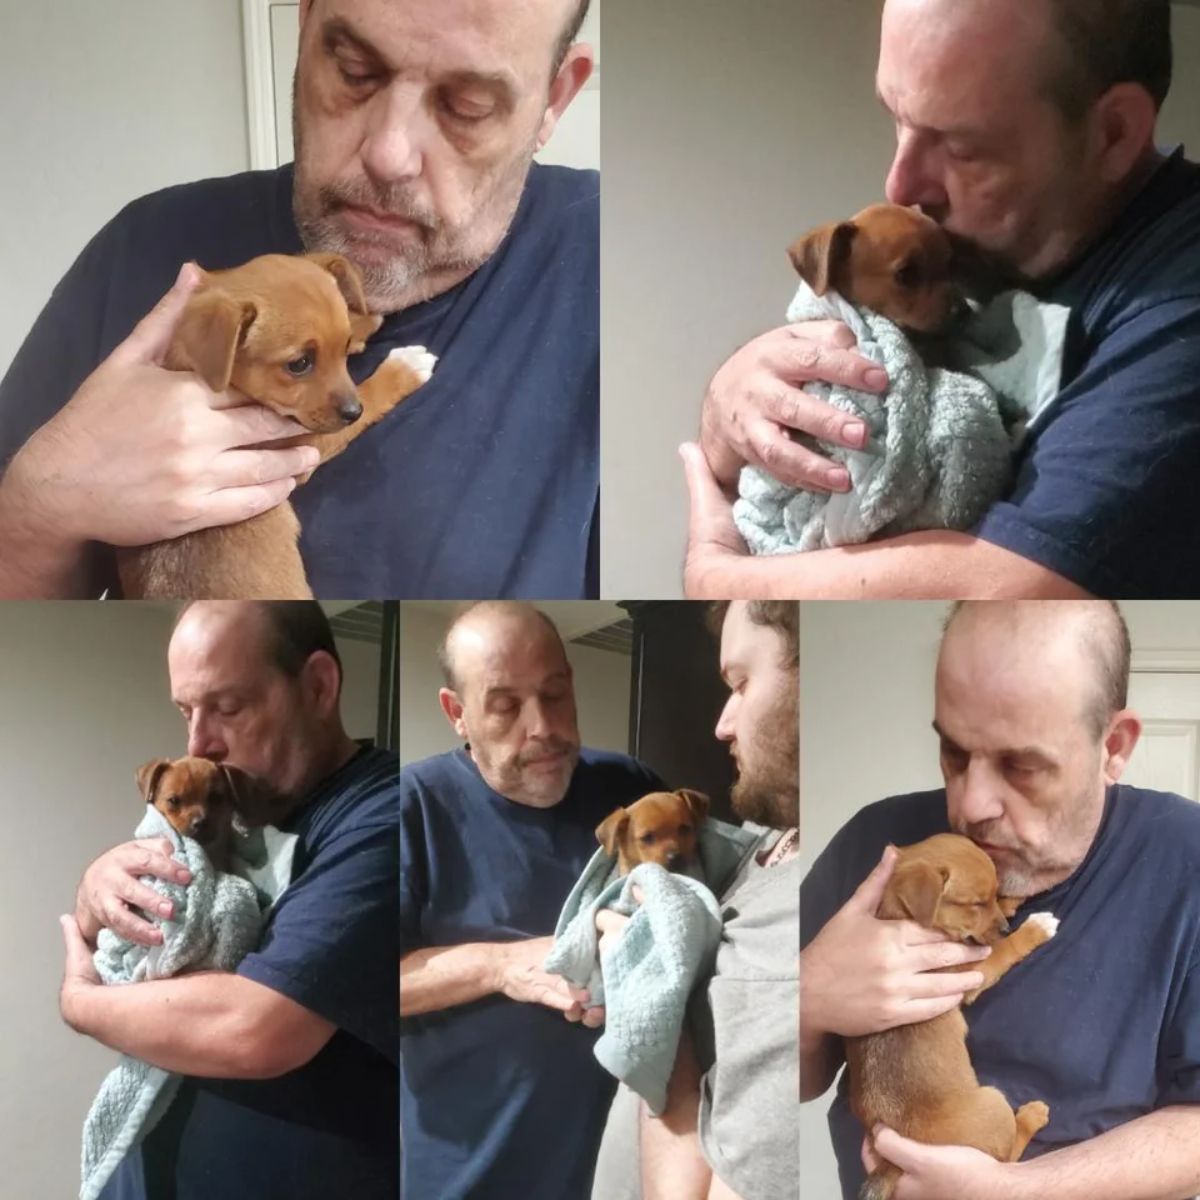 5 photos of a brown puppy with white paws wrapped in a blue blanket being hugged and kissed by an old man